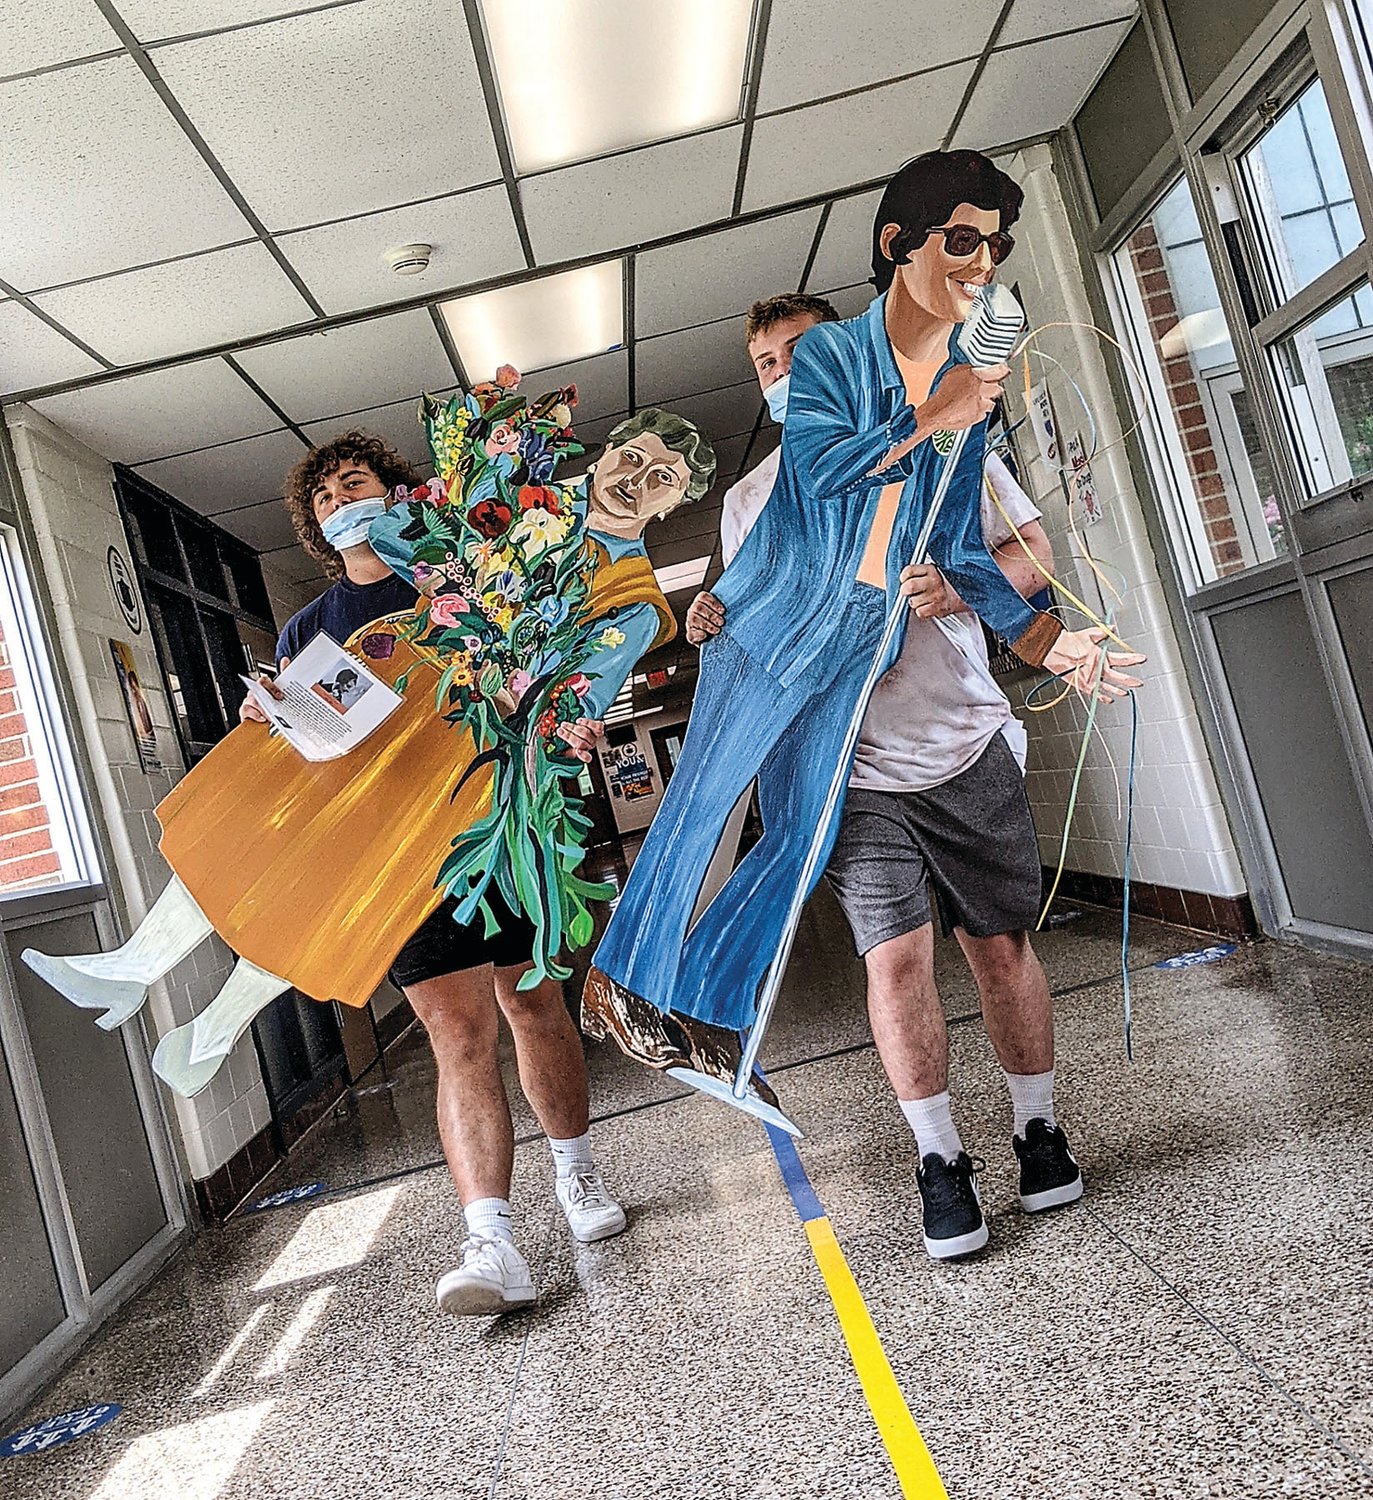 Cutouts of innovative floral designer Constance Spry (1886-1960) and gay and lesbian rights activist Jeanne Cordova (1948-2016) are delivered to classrooms by students Scott Pursell, left, and Tim Torrey.